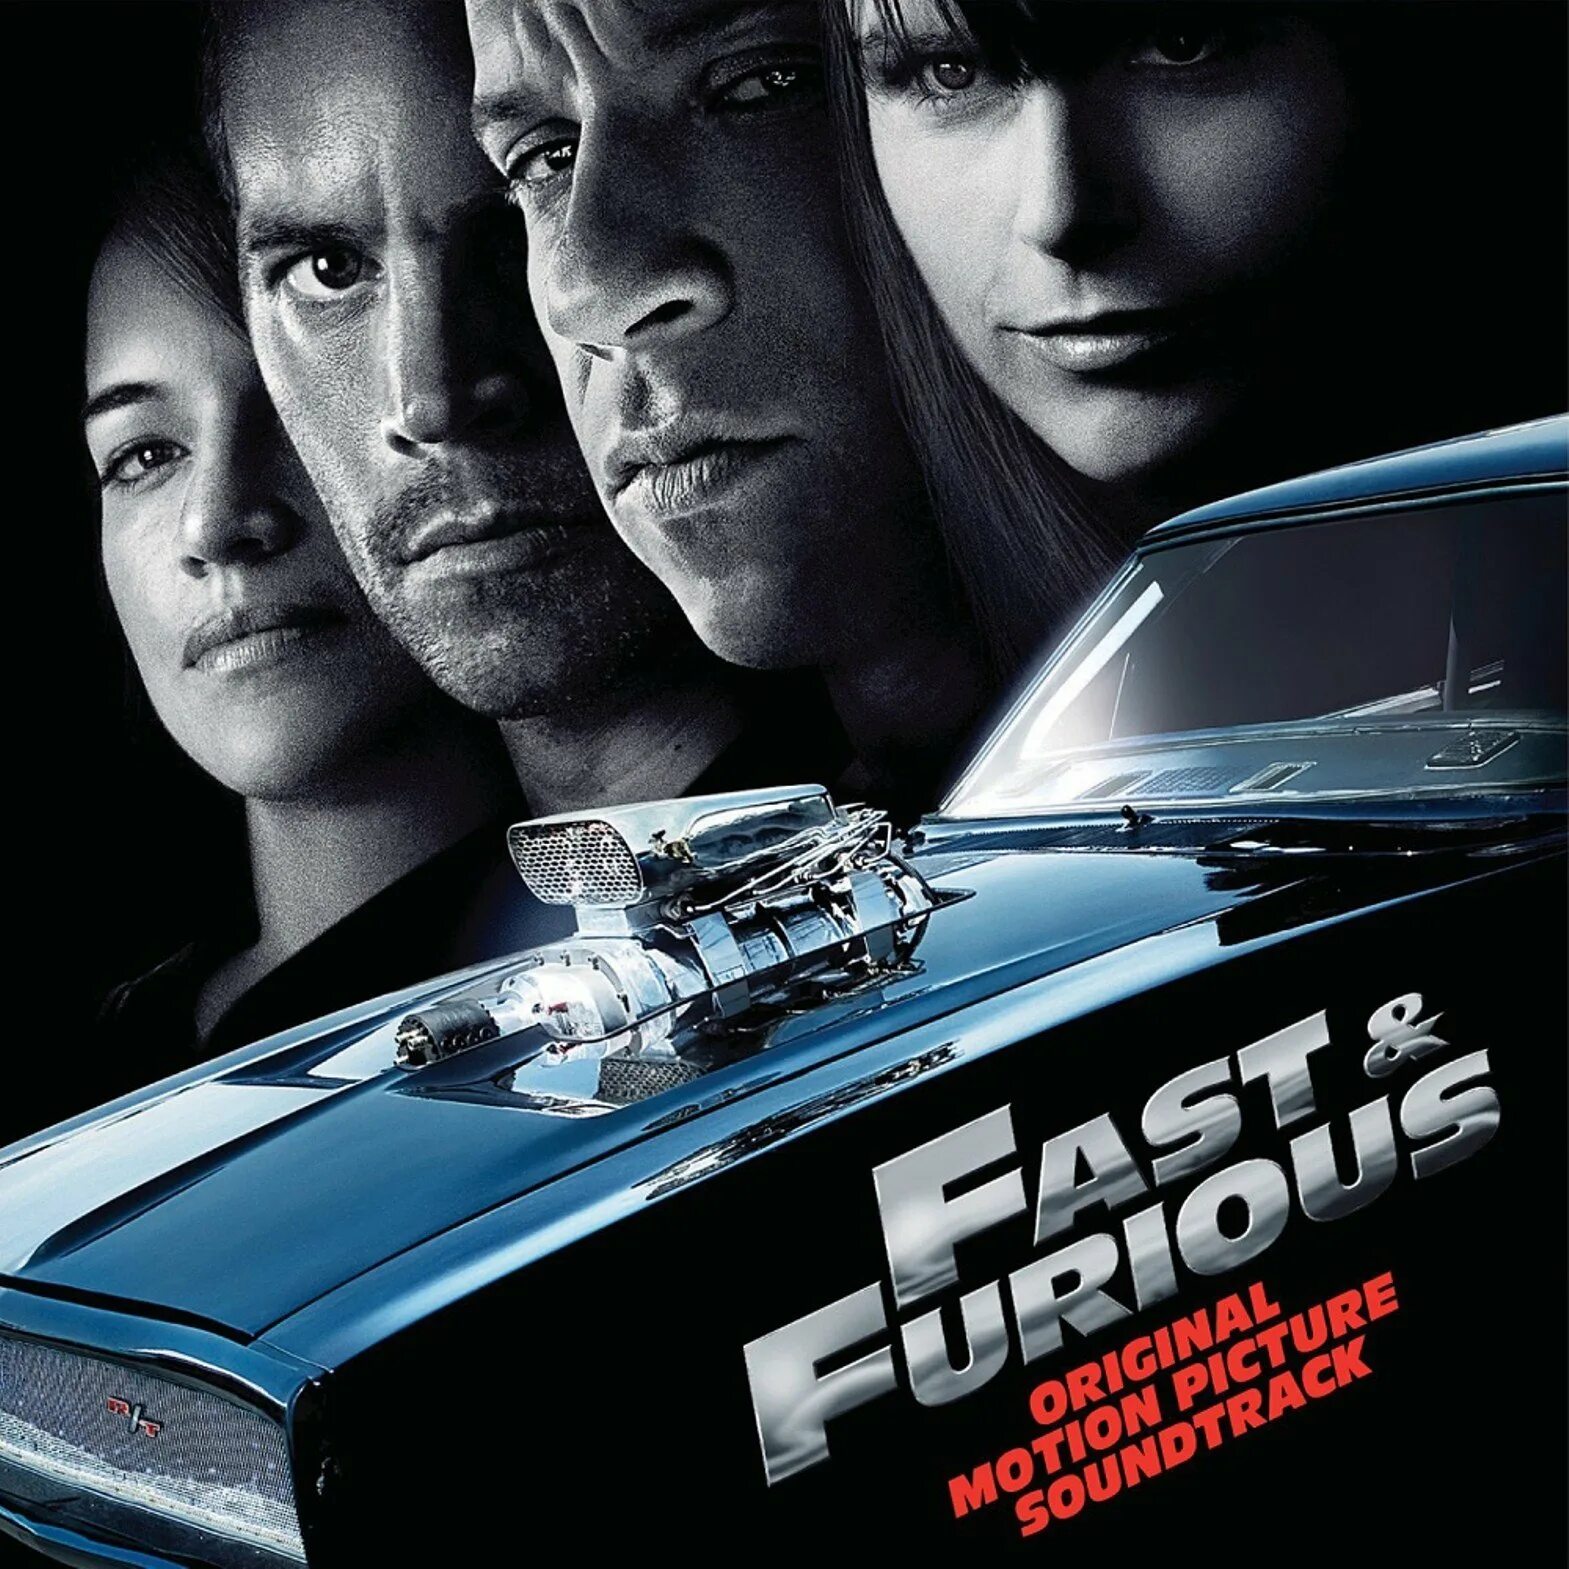 Fast and Furious обложка. Форсаж 4 (fast & Furious), 2009 Постер. Fast and Furious 4 OST. Soundtrack fast